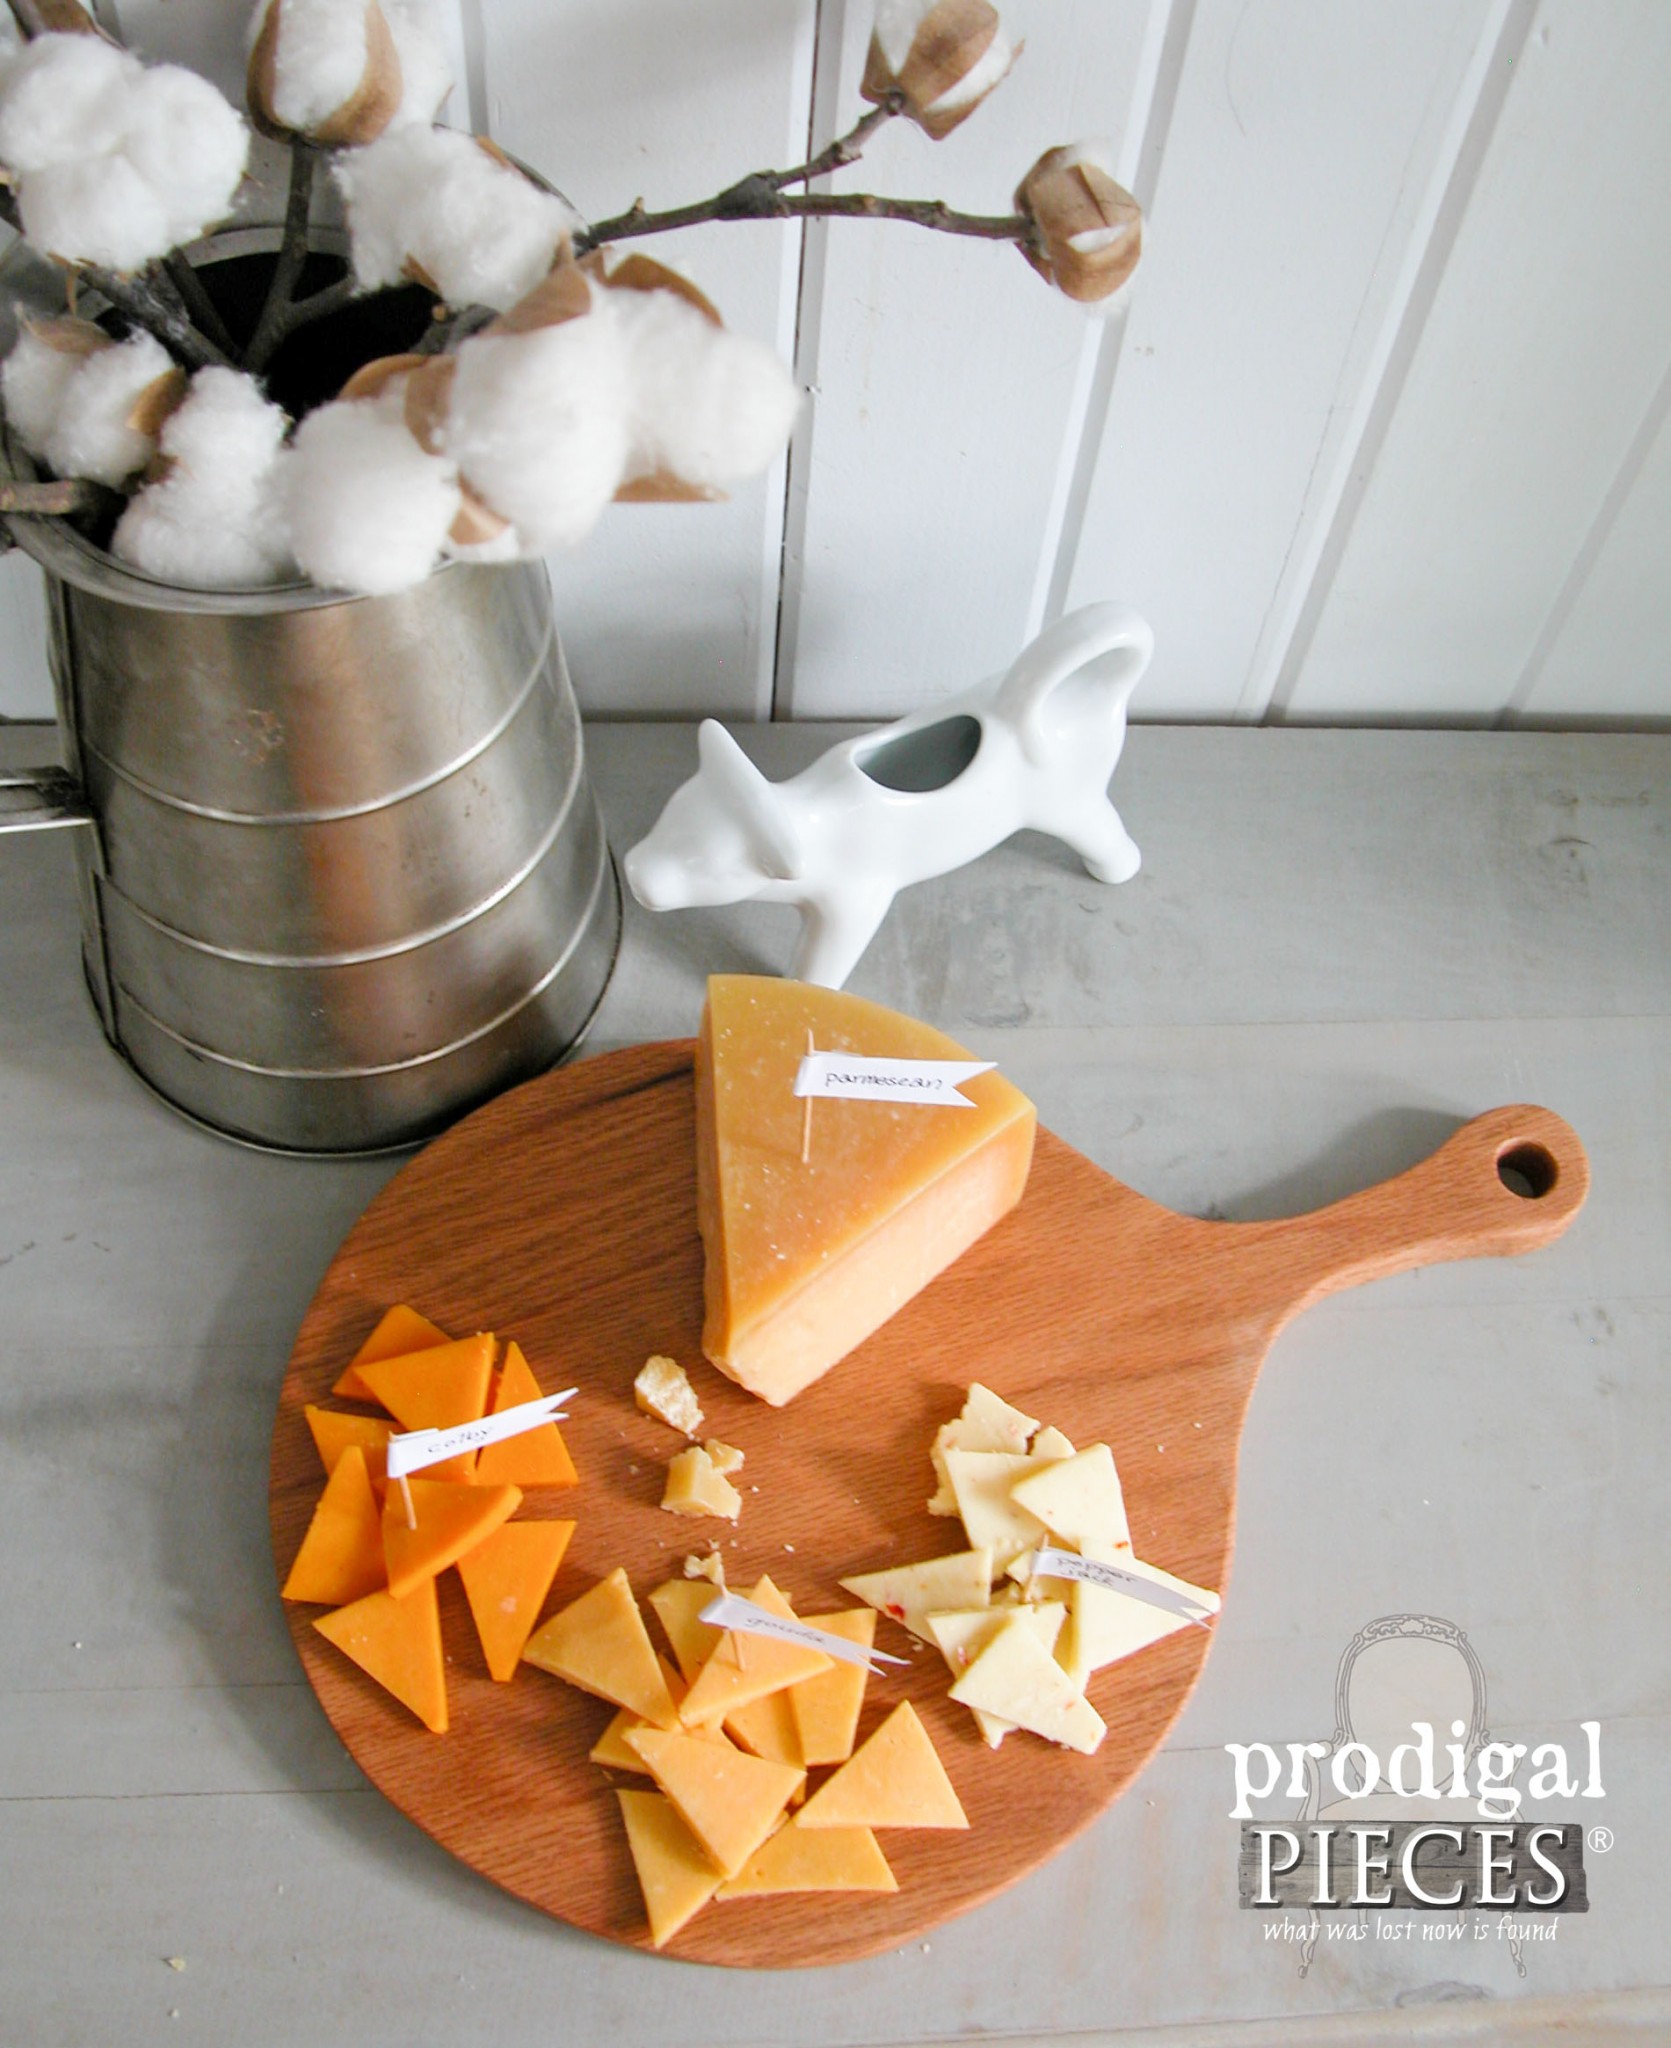 Make Your Own Farmhouse Cheese Board by Prodigal Pieces | www.prodigalpieces.com